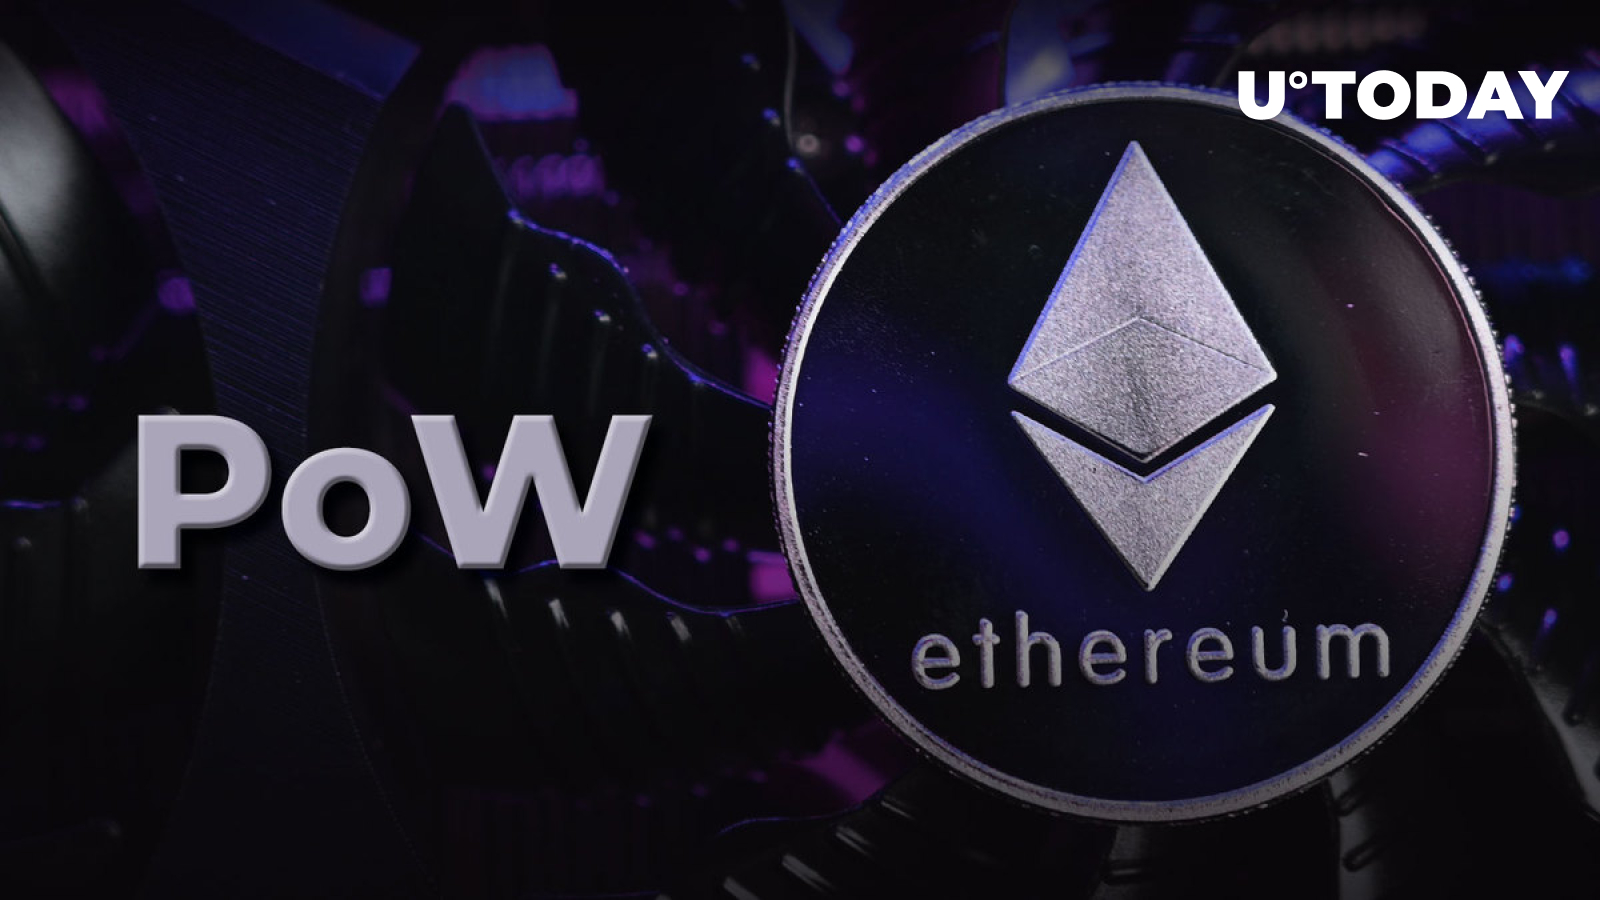 EthereumPoW (ETHW) Announces Its First Ecosystem List, Invites Startups - U.Today